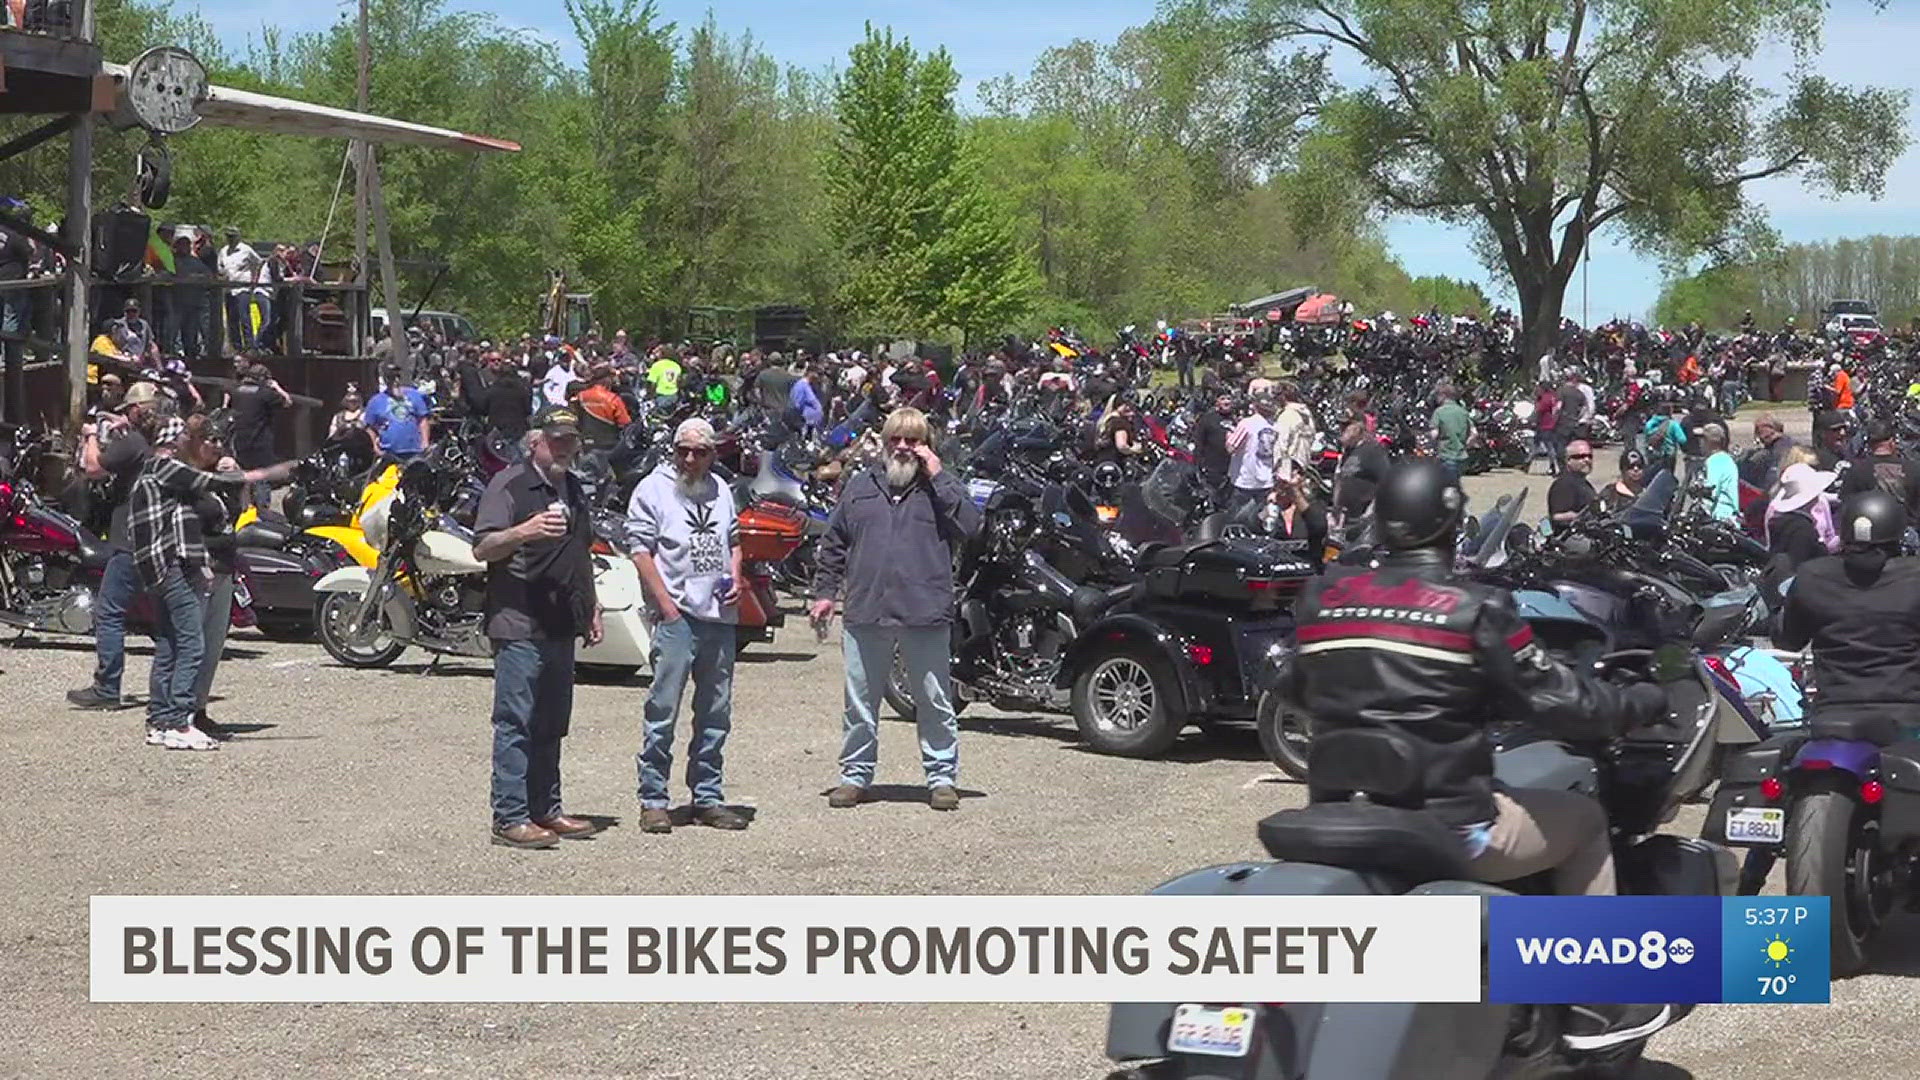 Thousands of bikers rolled into Psycho Silo Saloon to get their bikes blessed. The event kickstarts the riding season and promotes safety on the roadways.